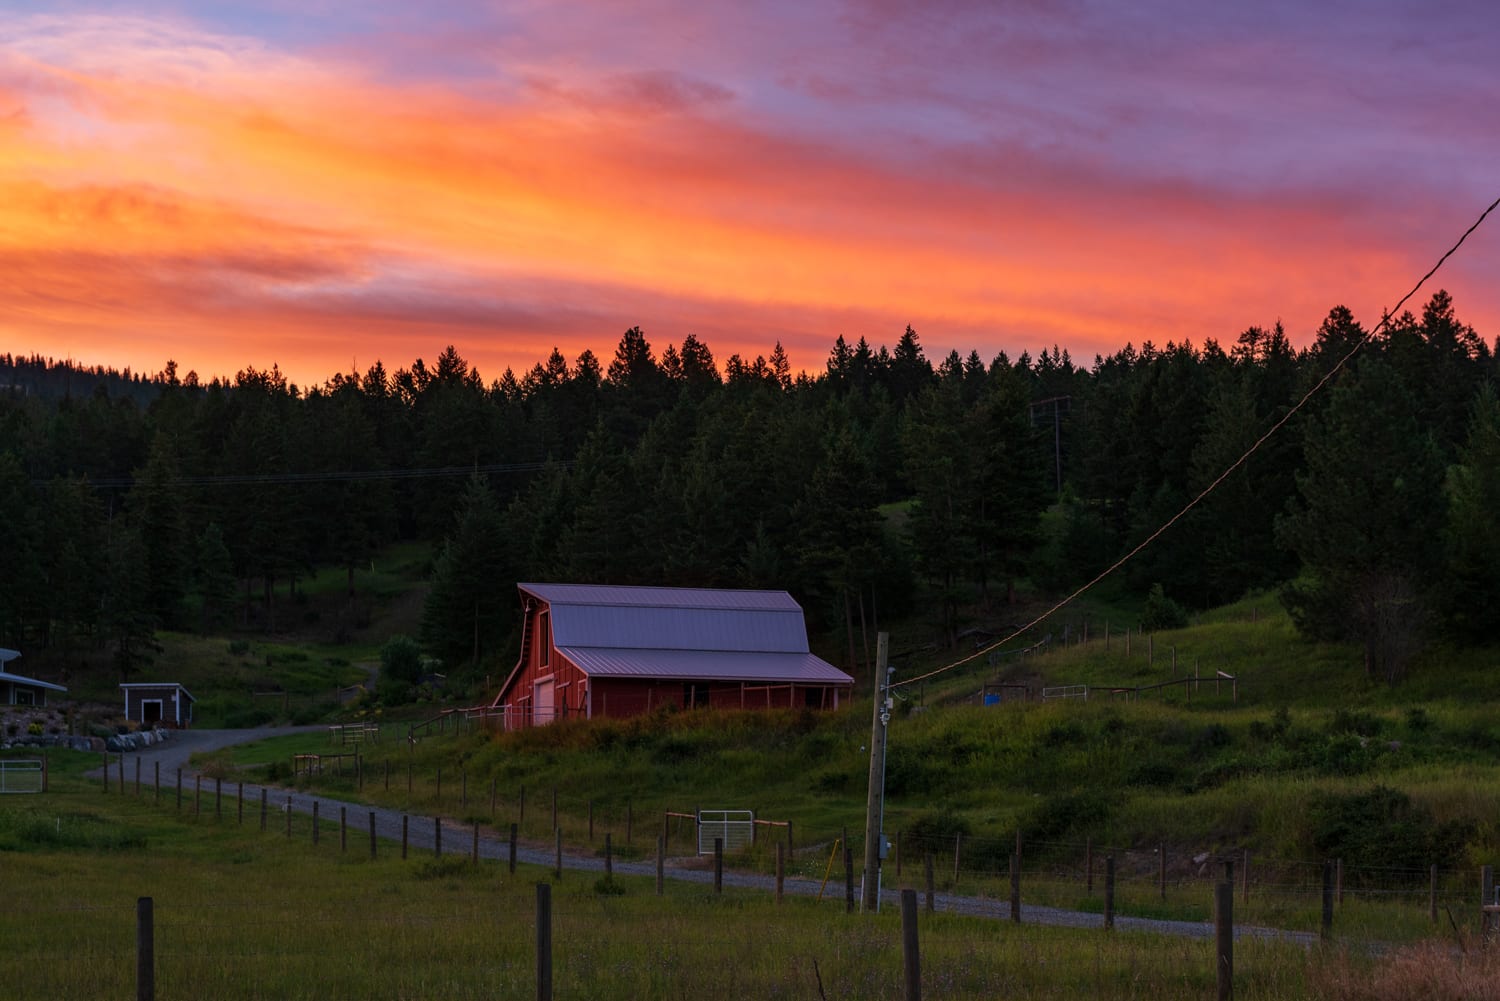 Kamloops rural life red ranch with sunset and trees with wooden fences